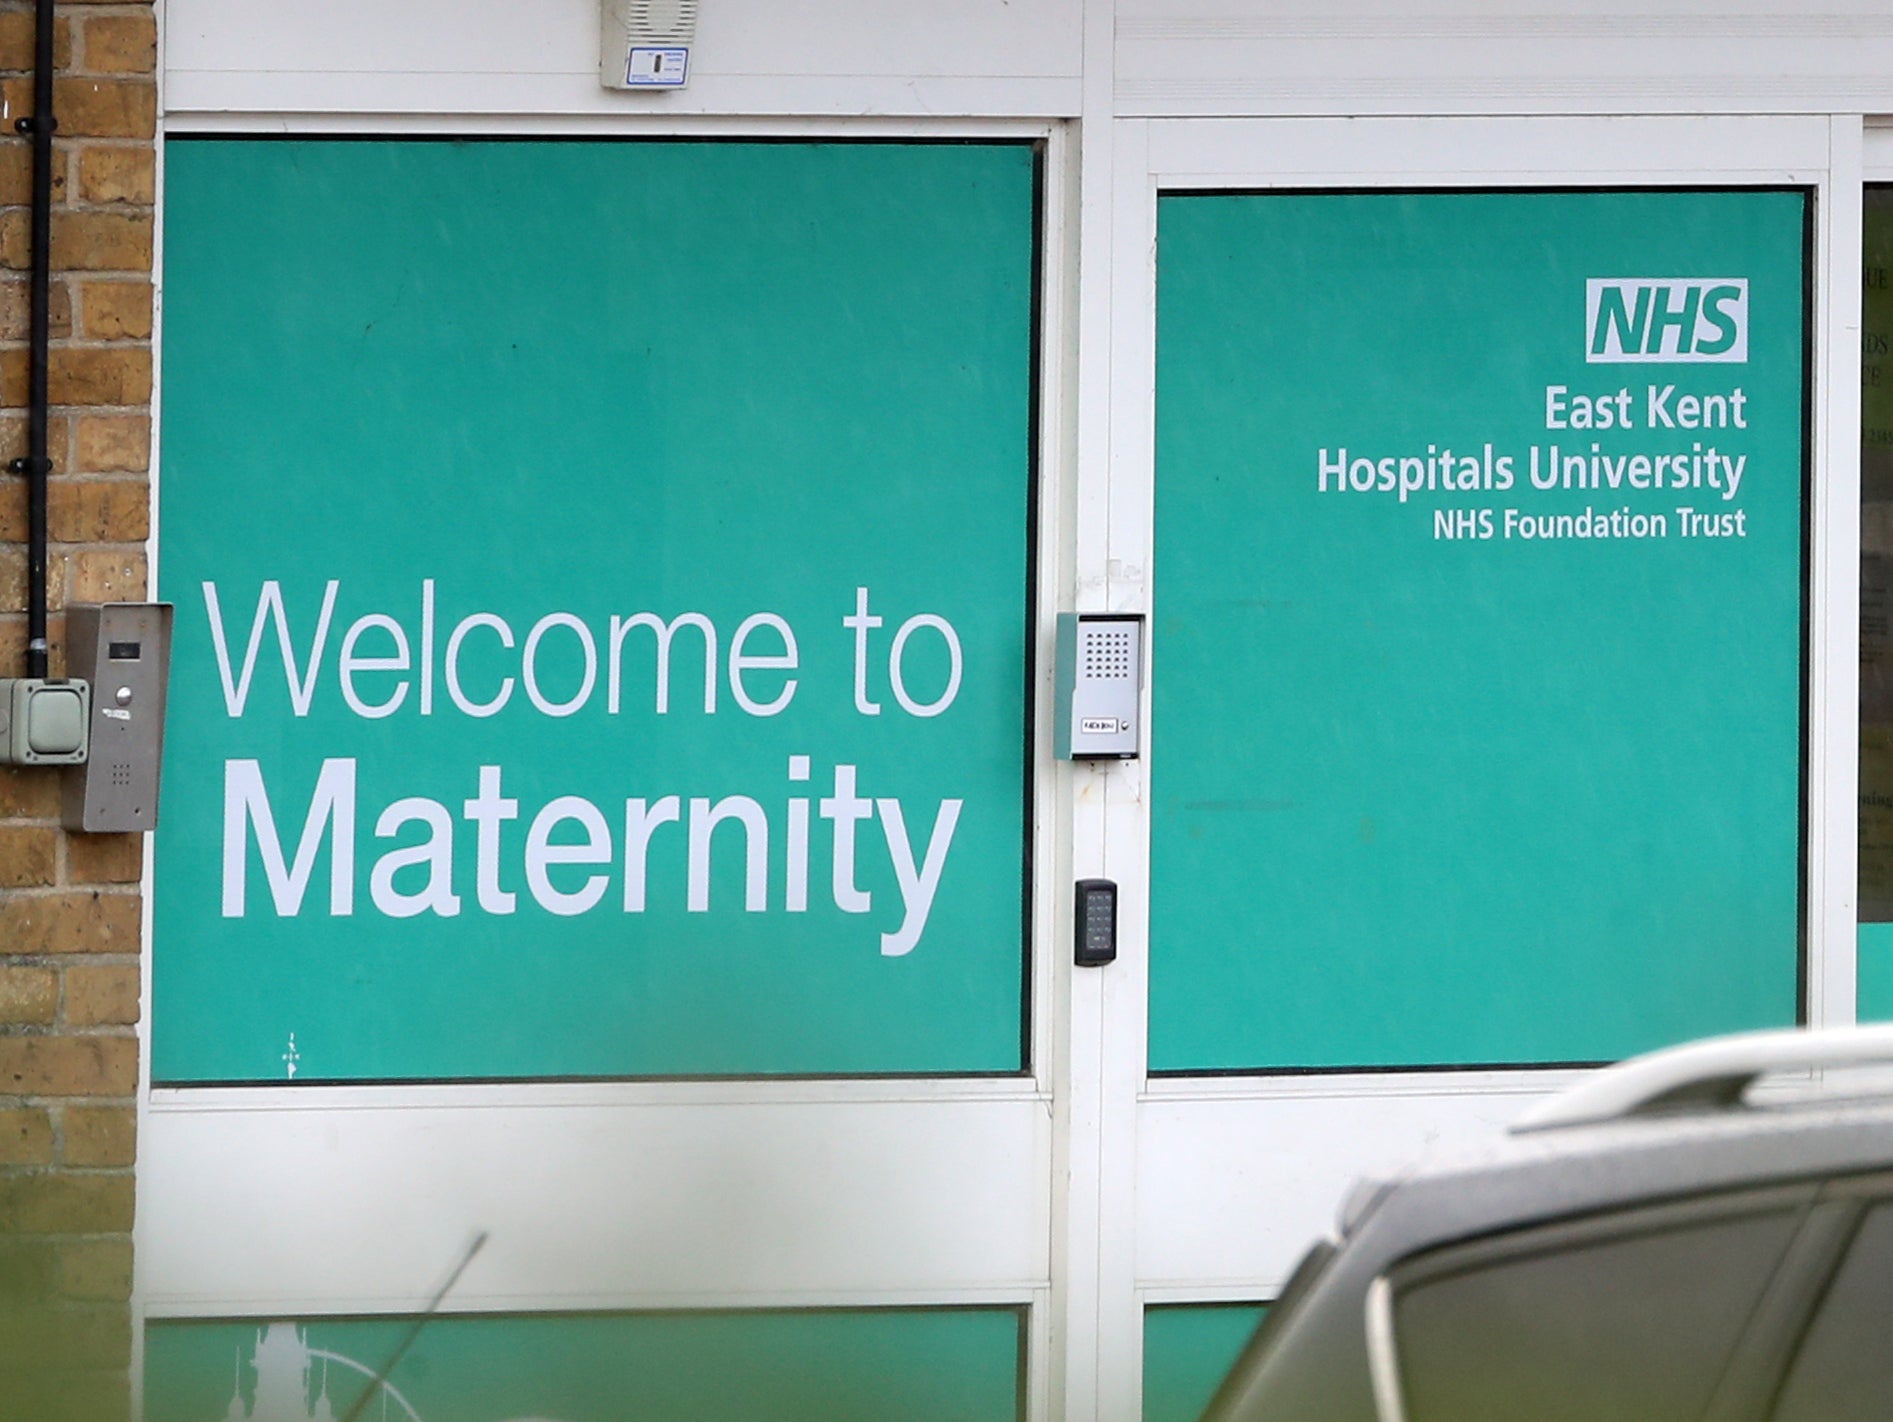 Maternity services at East Kent Hospitals University Trust have been heavily criticised